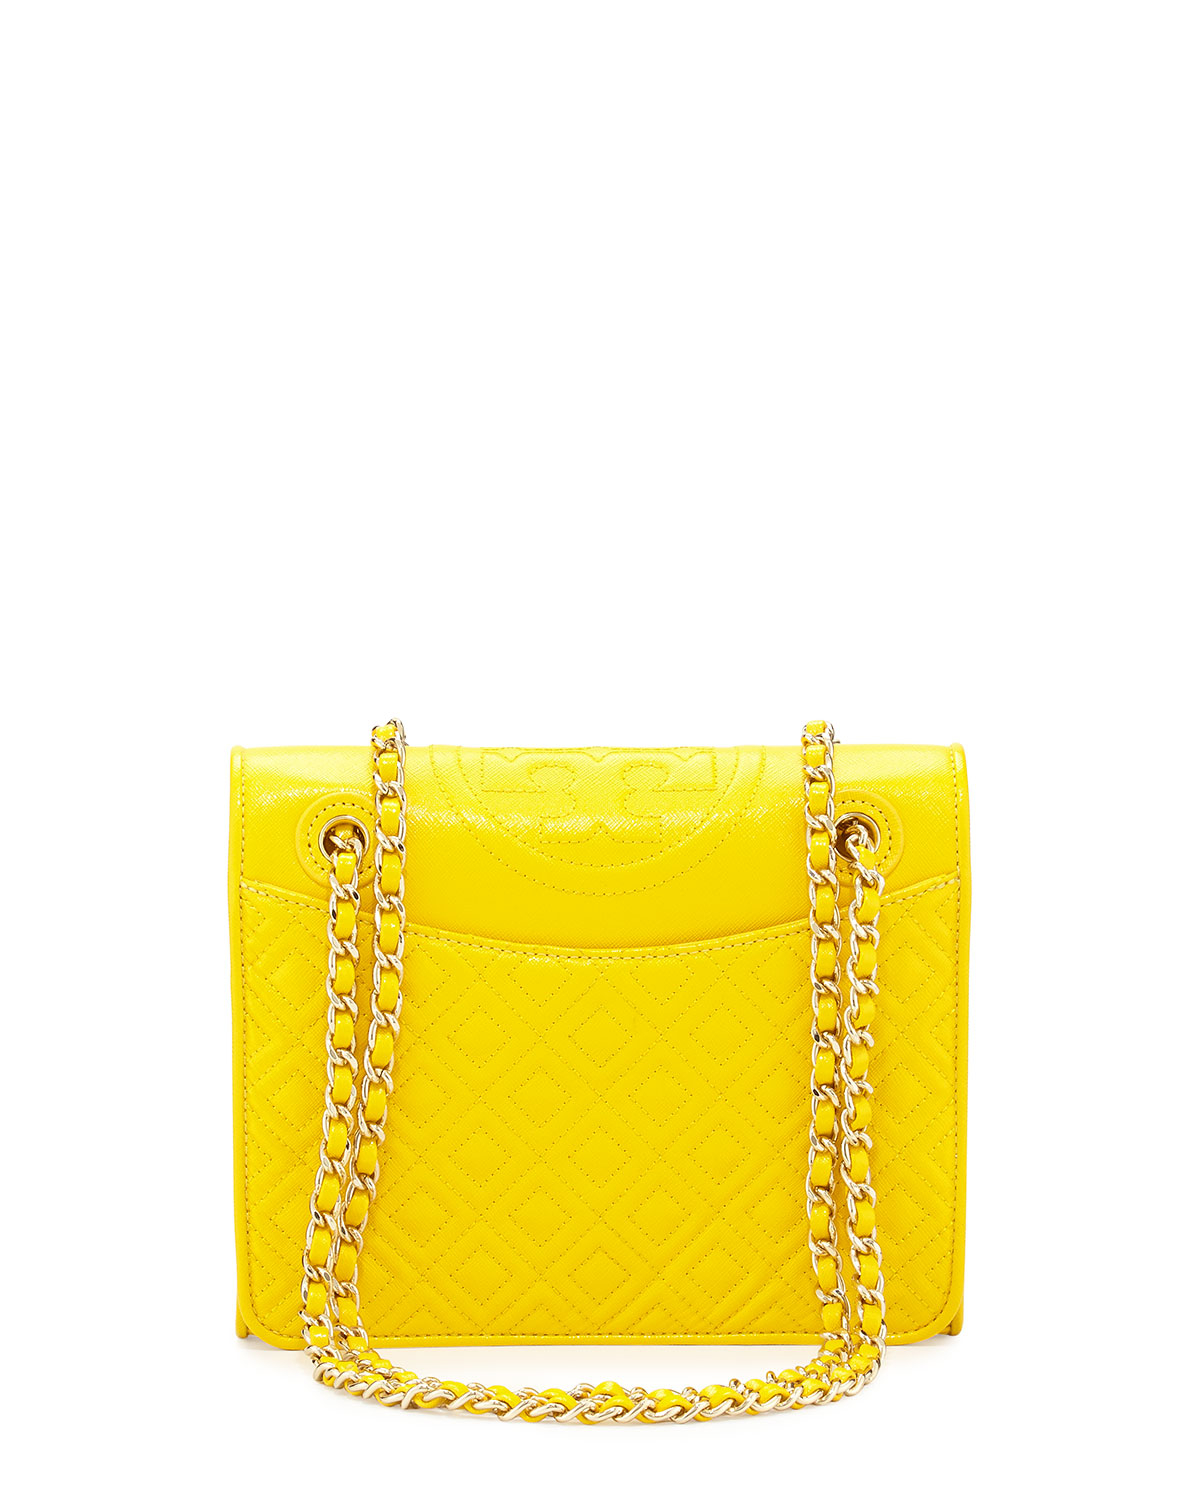 Tory burch Fleming Quilted Medium Flap Shoulder Bag in Yellow | Lyst